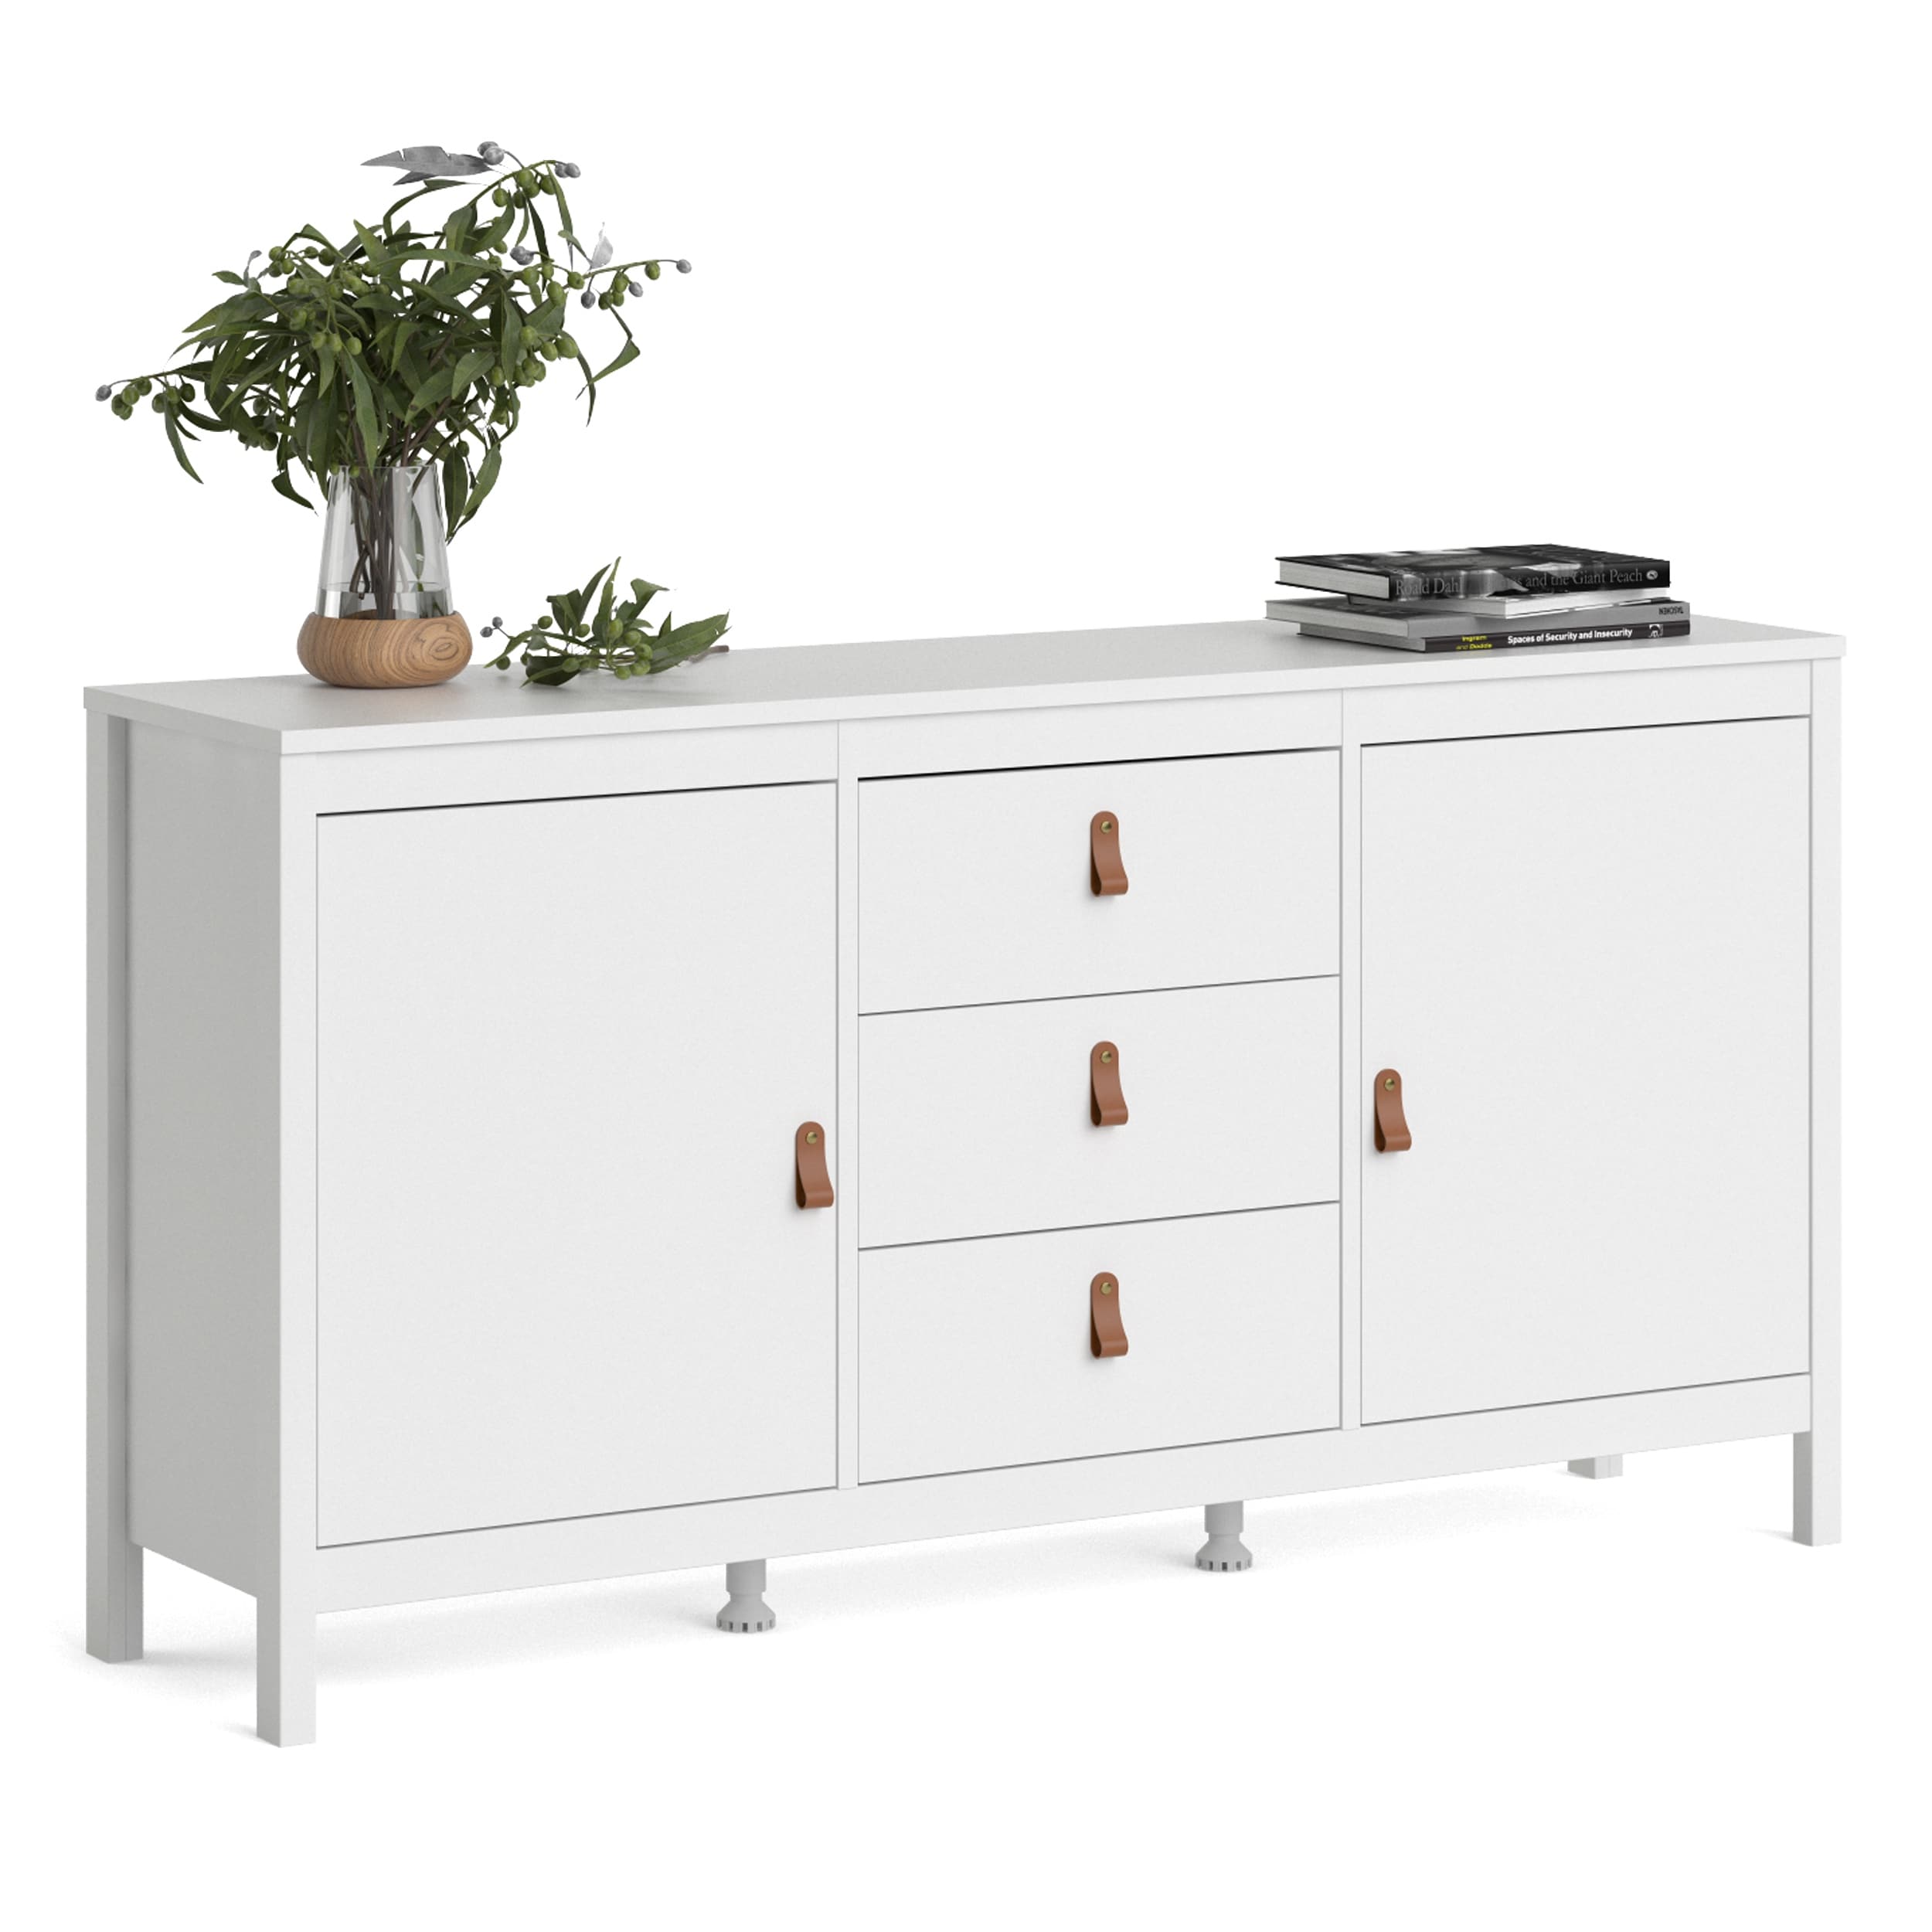 Porch & Den Madrid - with Sale Beyond Bed 2-Door 3-Drawers - Bath Sideboard On - & 33673465